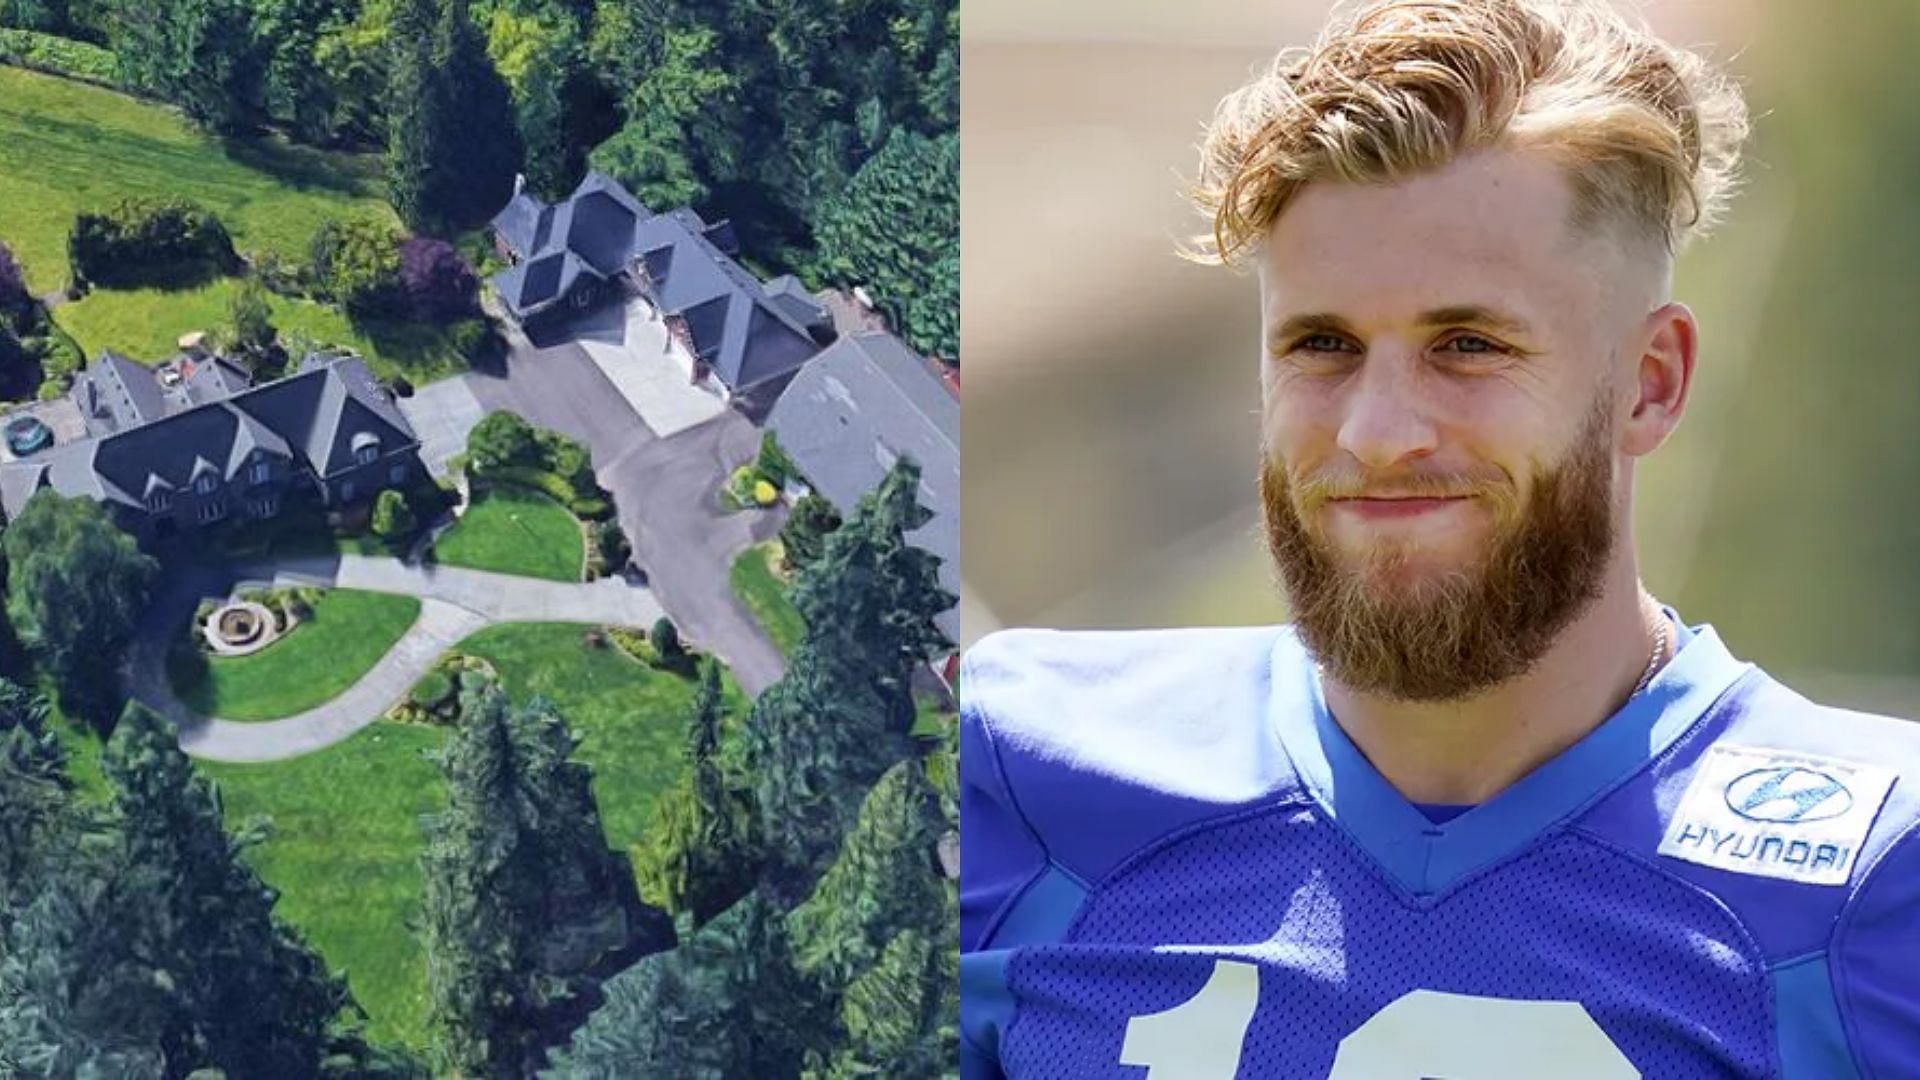 The Rams star is looking to sell his opulent Oregon property for an exorbitant amount.